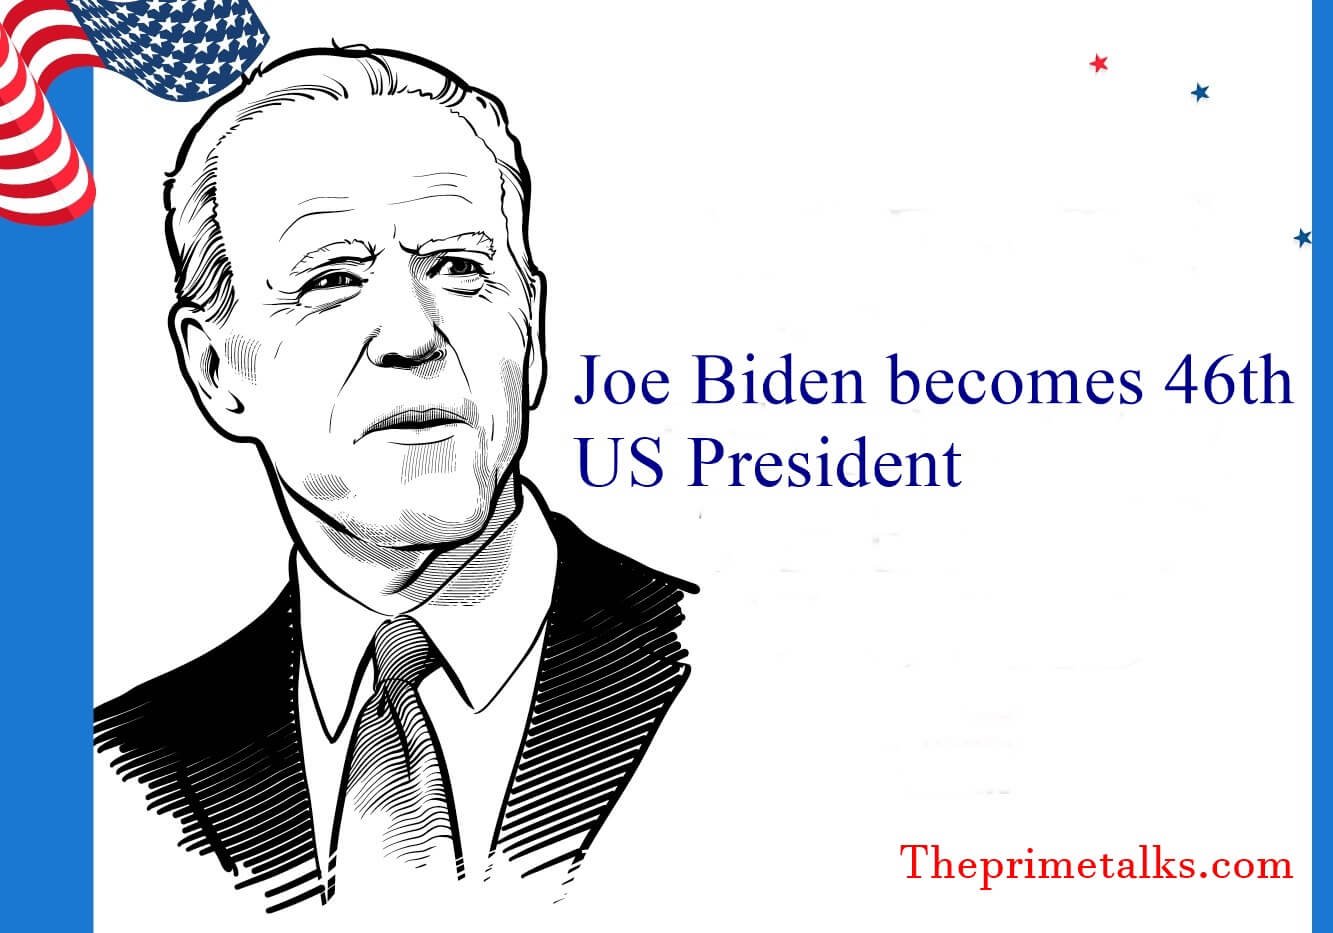 Joe biden becomes 46th president of the united states